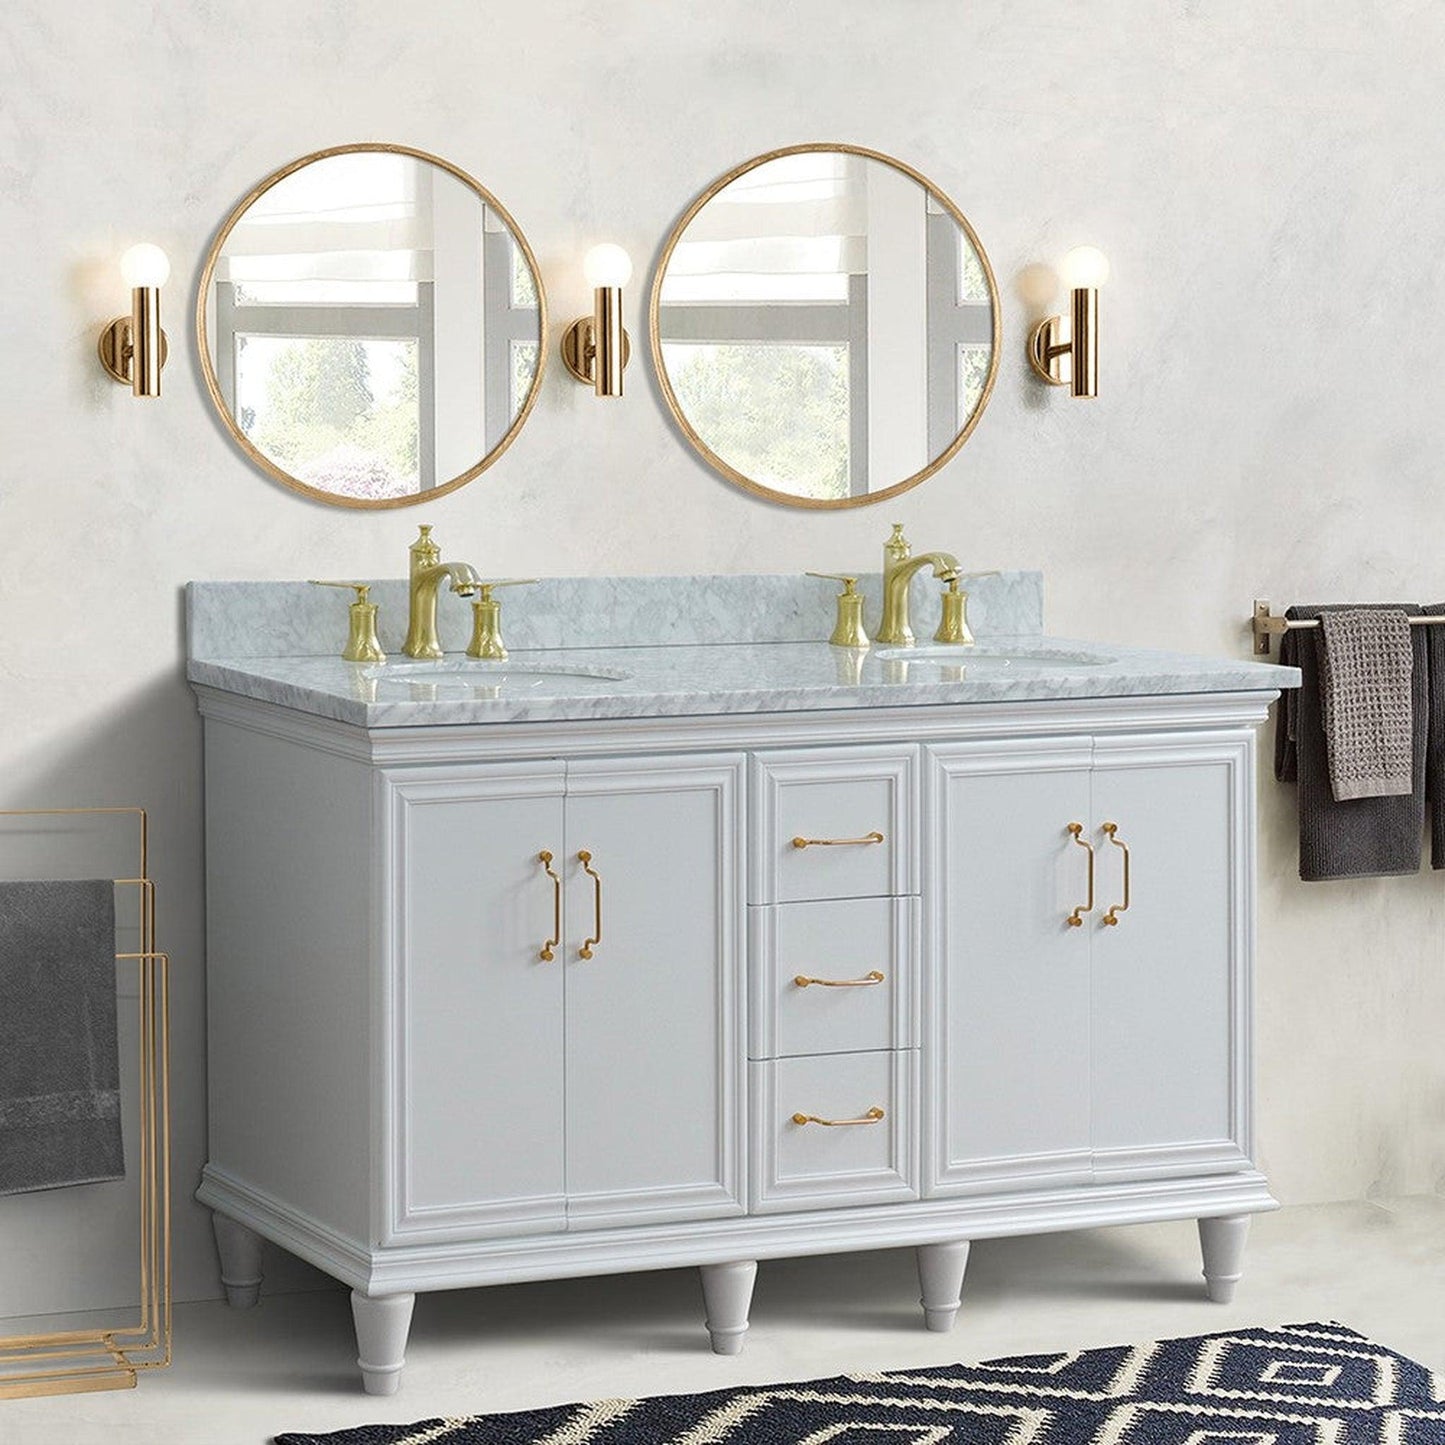 Bellaterra Home Forli 61" 4-Door 3-Drawer White Freestanding Vanity Set With Ceramic Double Undermount Oval Sink and White Carrara Marble Top